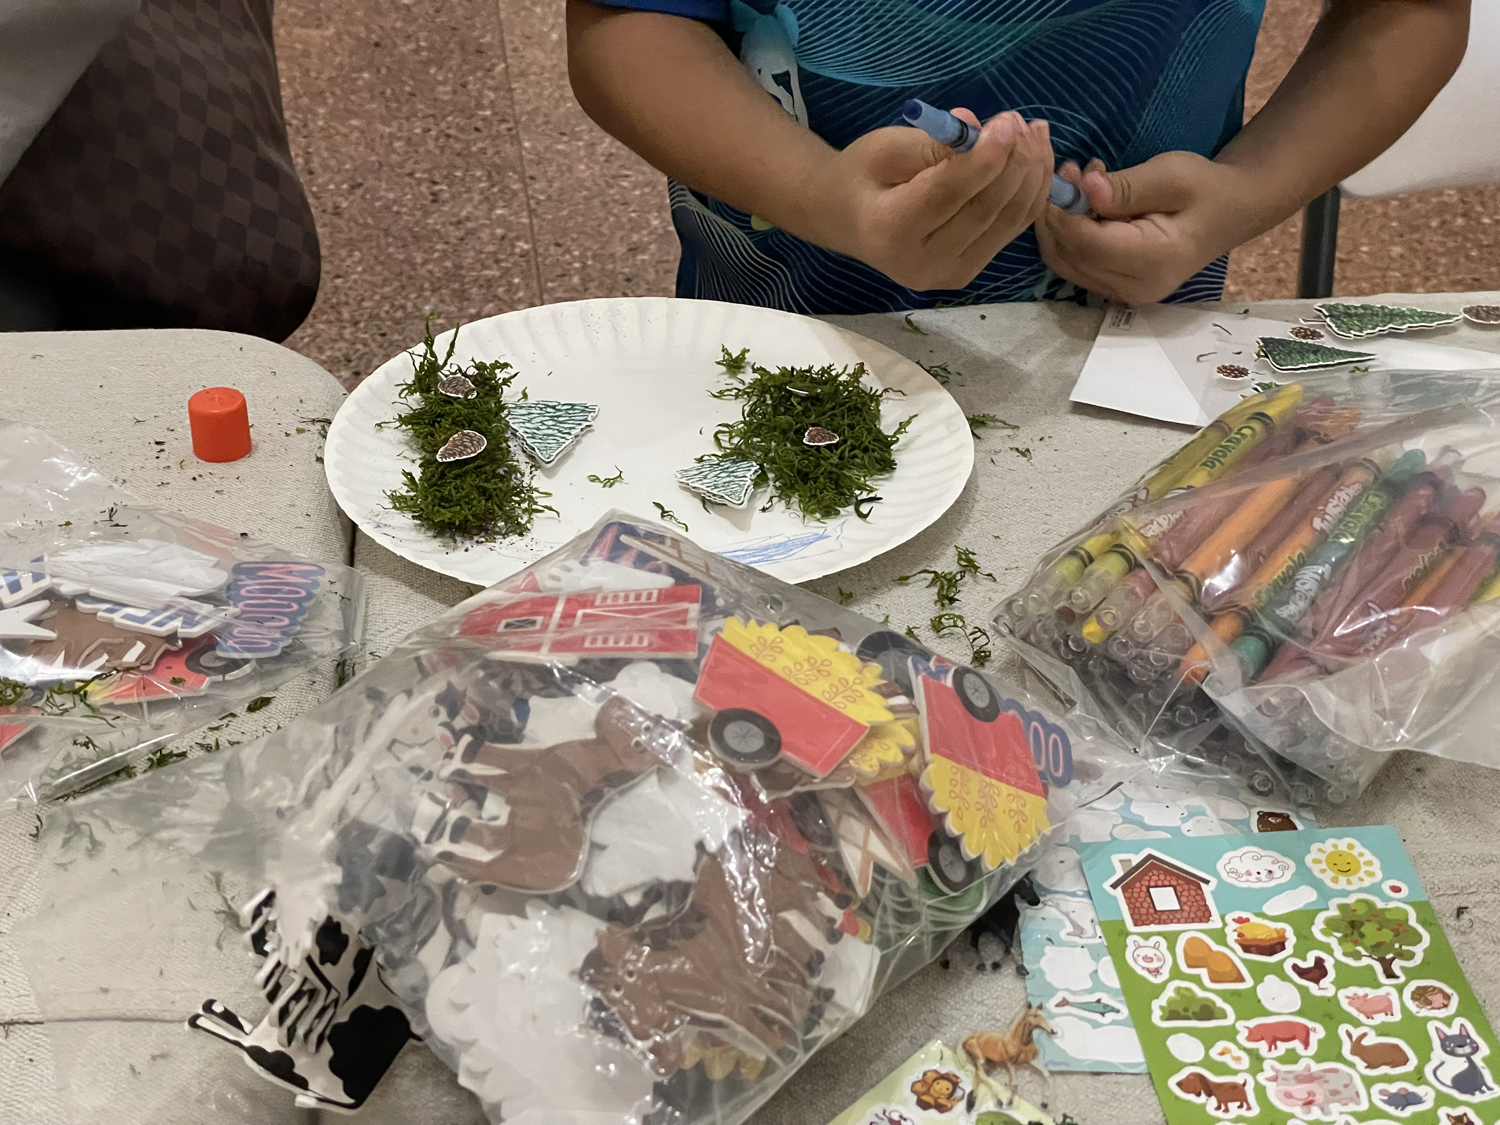 Craft supplies are spread on a table in front of a child holding a crayon